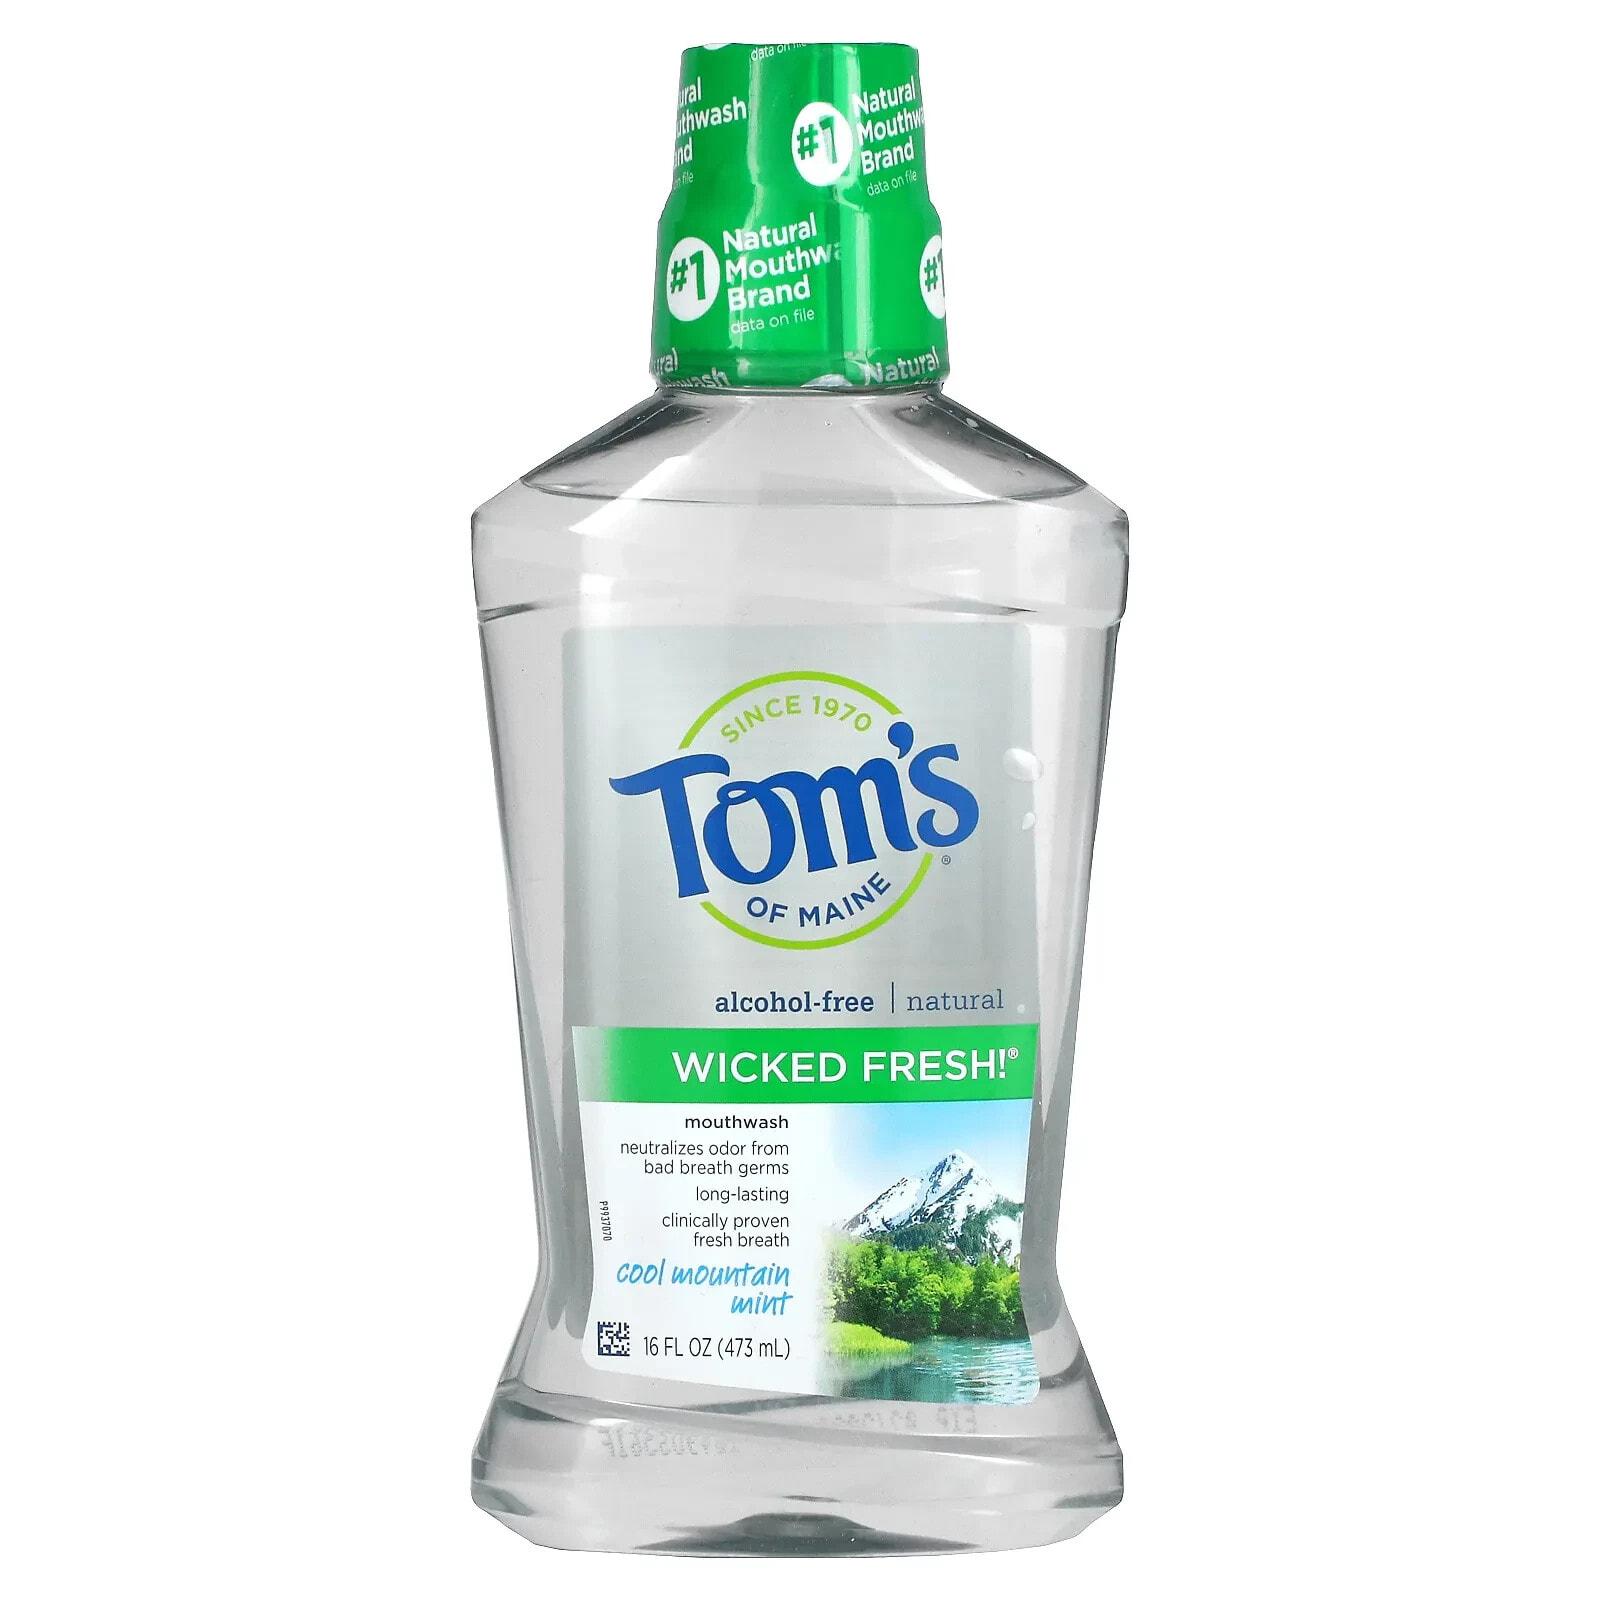 Toms of Maine, Wicked Fresh! Mouthwash, Cool Mountain Mint, 16 fl oz (473 ml)